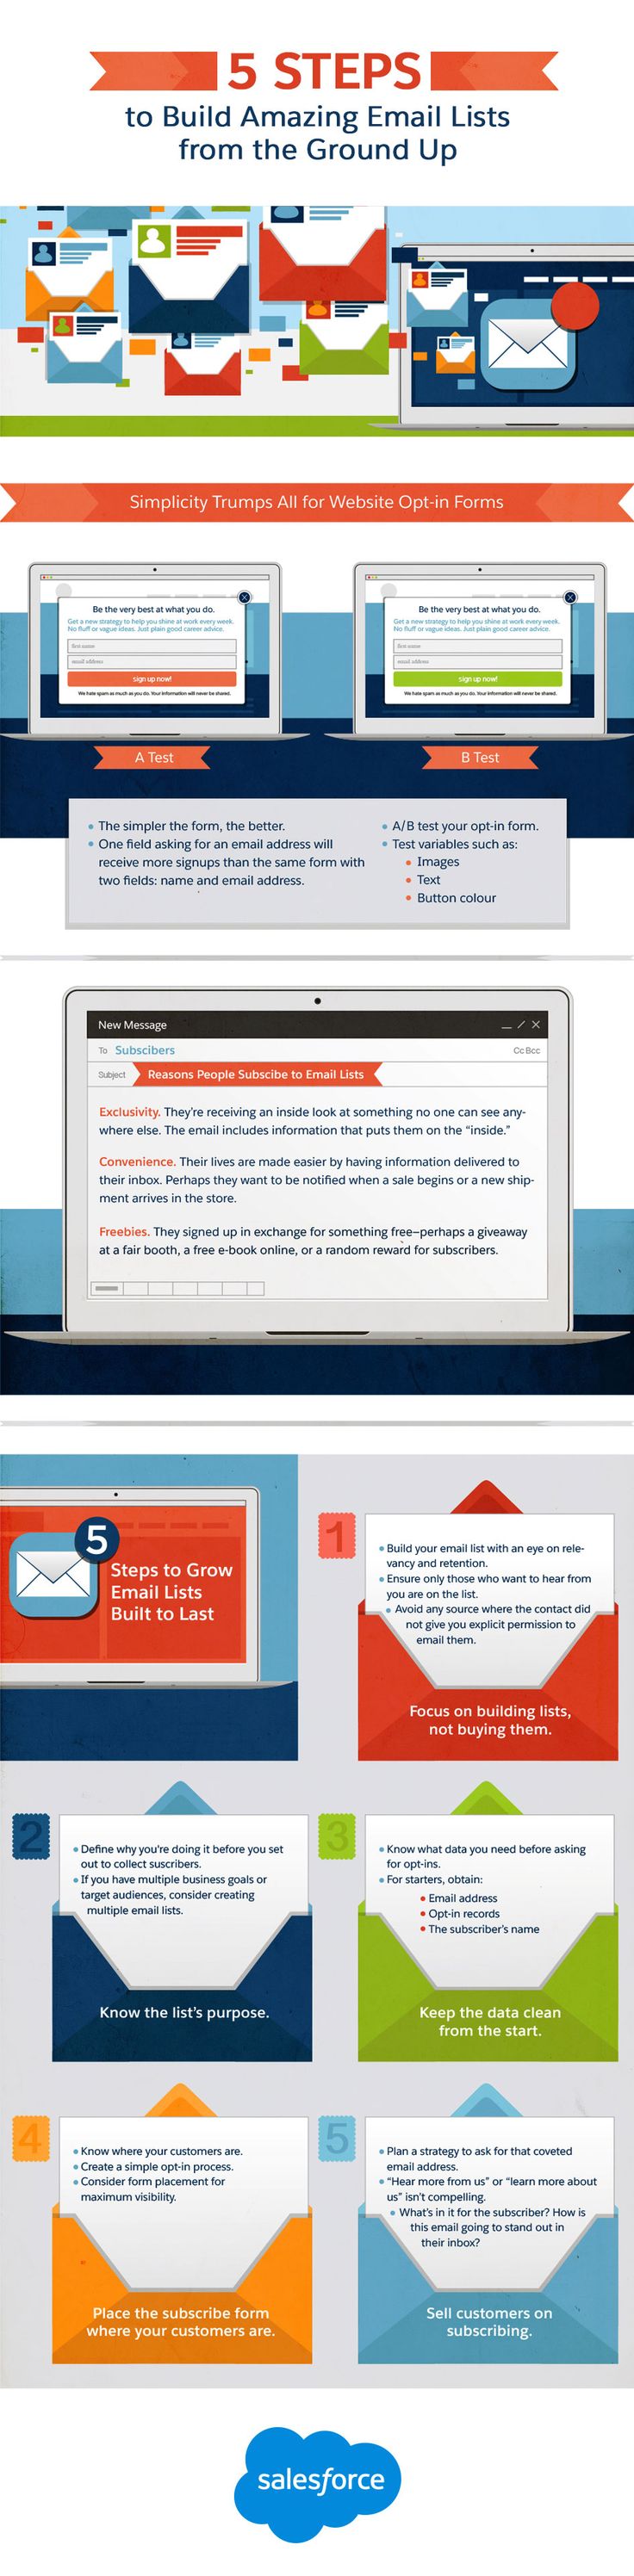 Digital-Marketing-5-Steps-to-Build-Amazing-Email-Lists-from-the-Ground-Up-infographic-EmailMarke Digital Marketing : 5 Steps to Build Amazing Email Lists from the Ground Up #infographic #EmailMarke...